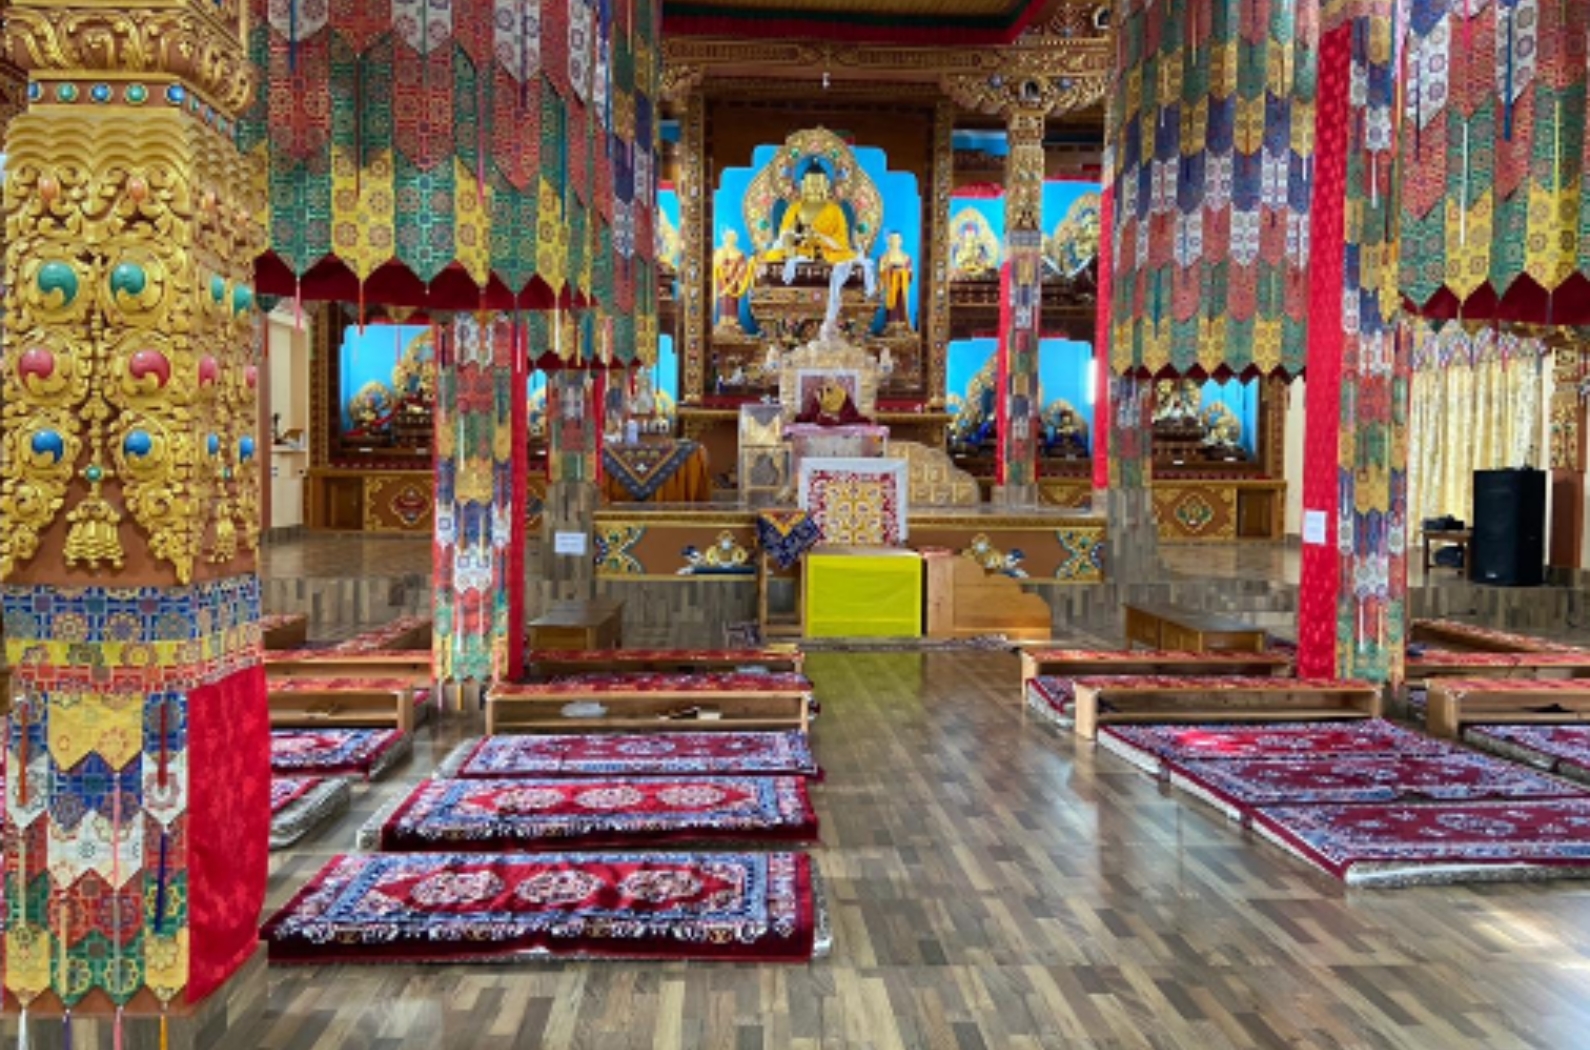 The monastery was founded by Merek Lama Lodge Gyamsto in the year 1680-1681 at the order of the 5th Dalai Lama.